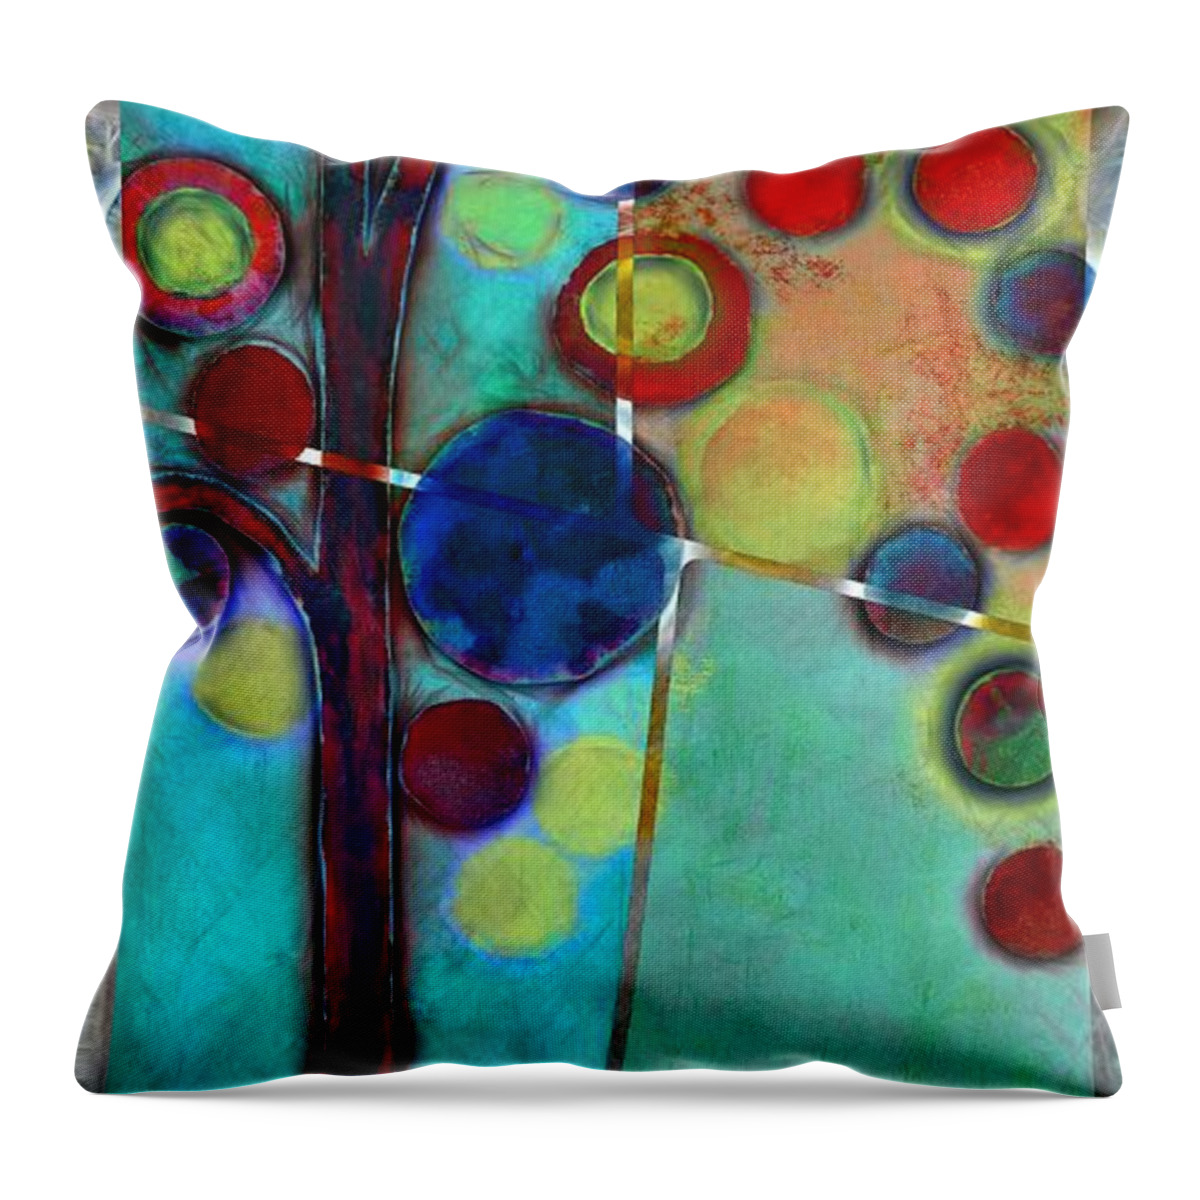 Tree Throw Pillow featuring the painting Bubble Tree - 7546r2 by Variance Collections